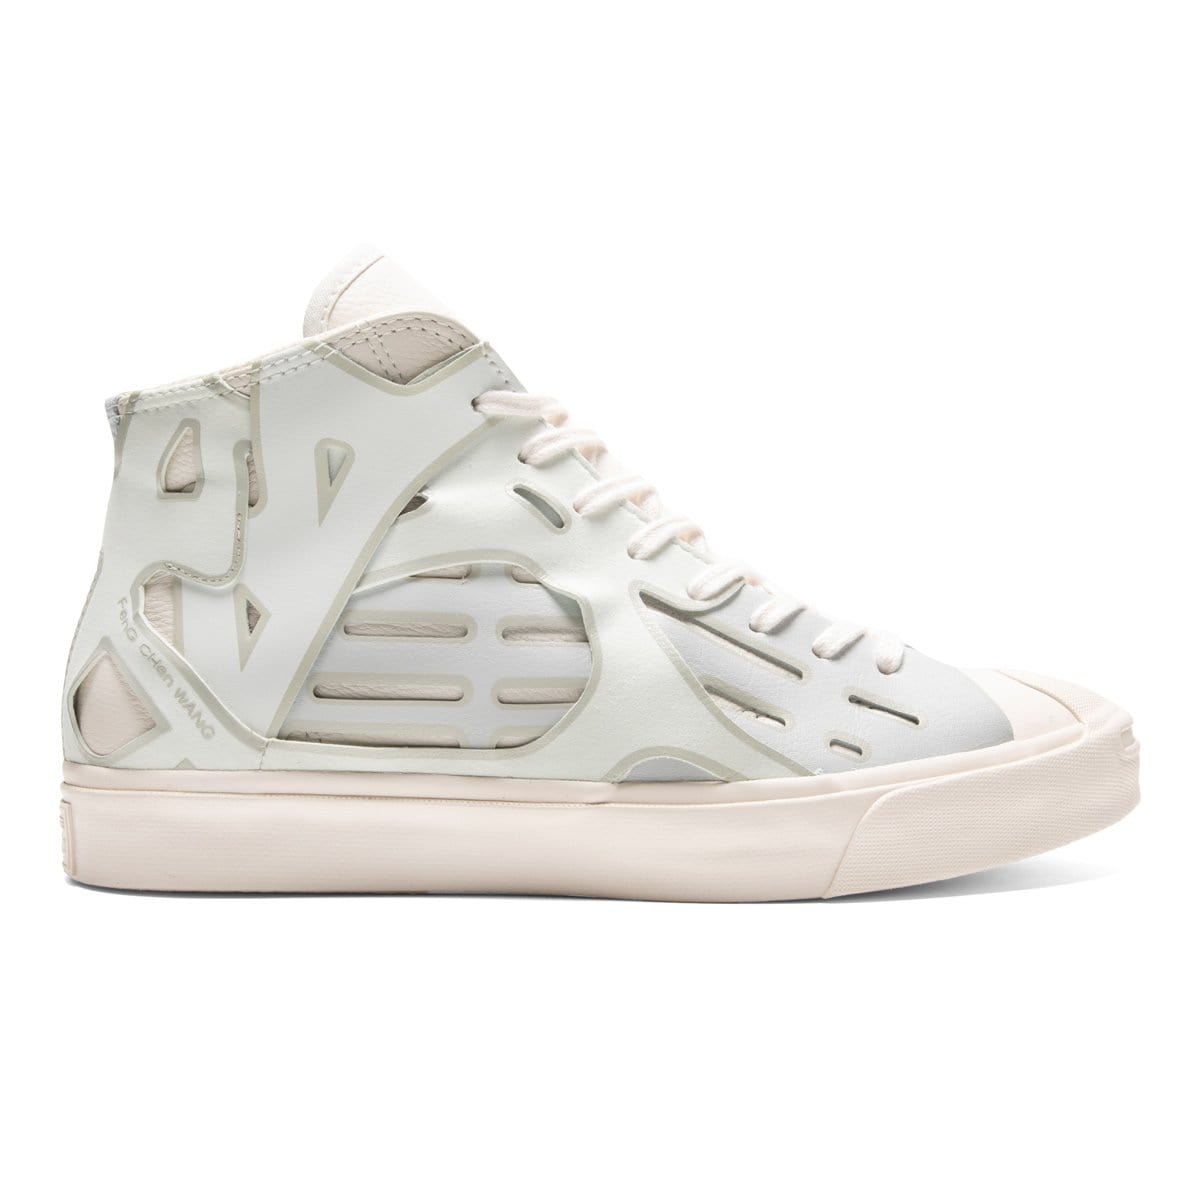 Converse Casual x Feng Chen Wang JACK PURCELL MID